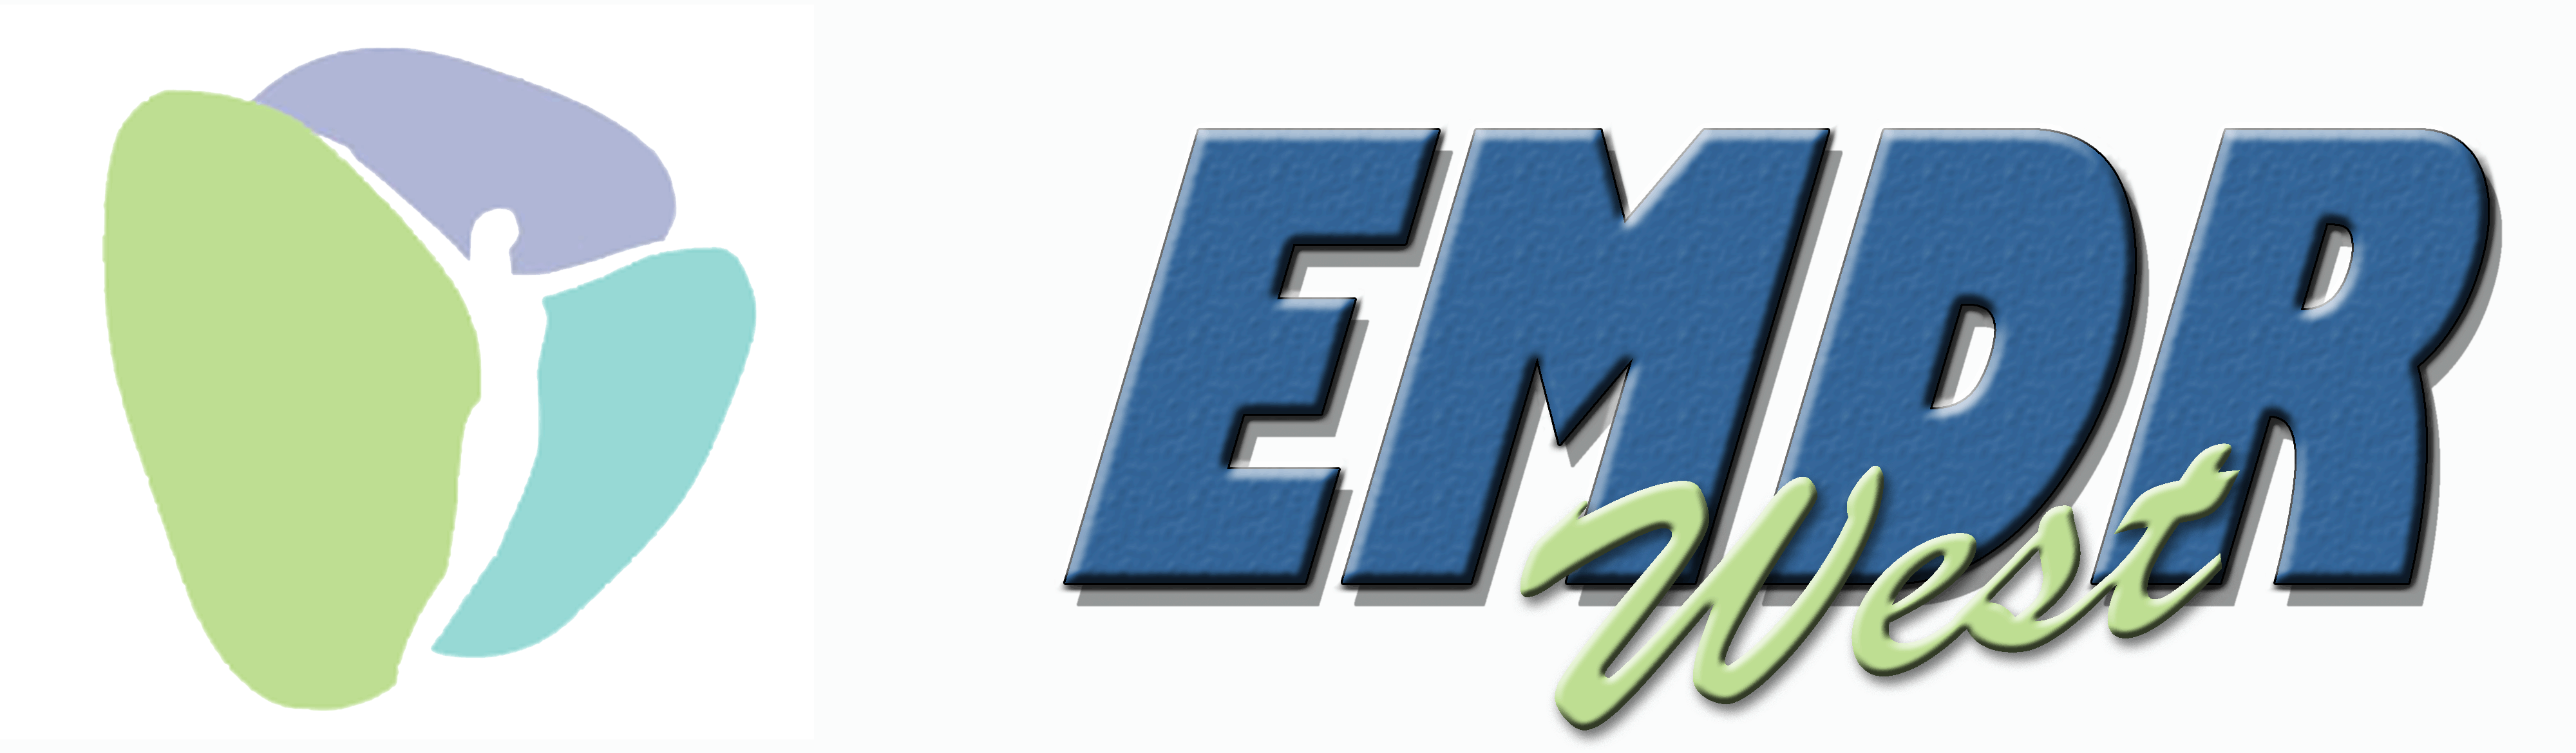 EMDR West Therapy Counseling Los Angeles Logo